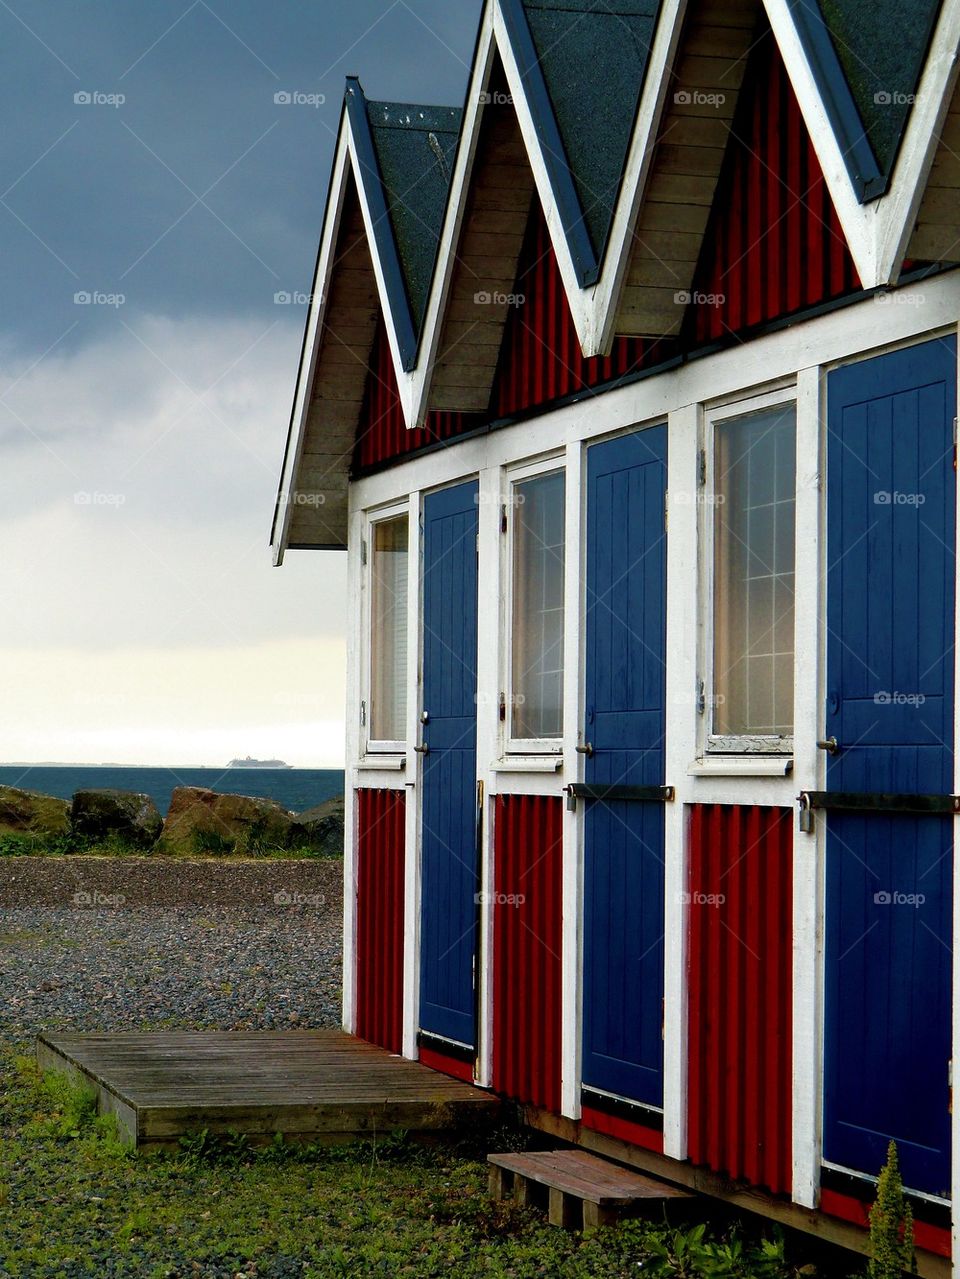 Boathouses by the coast